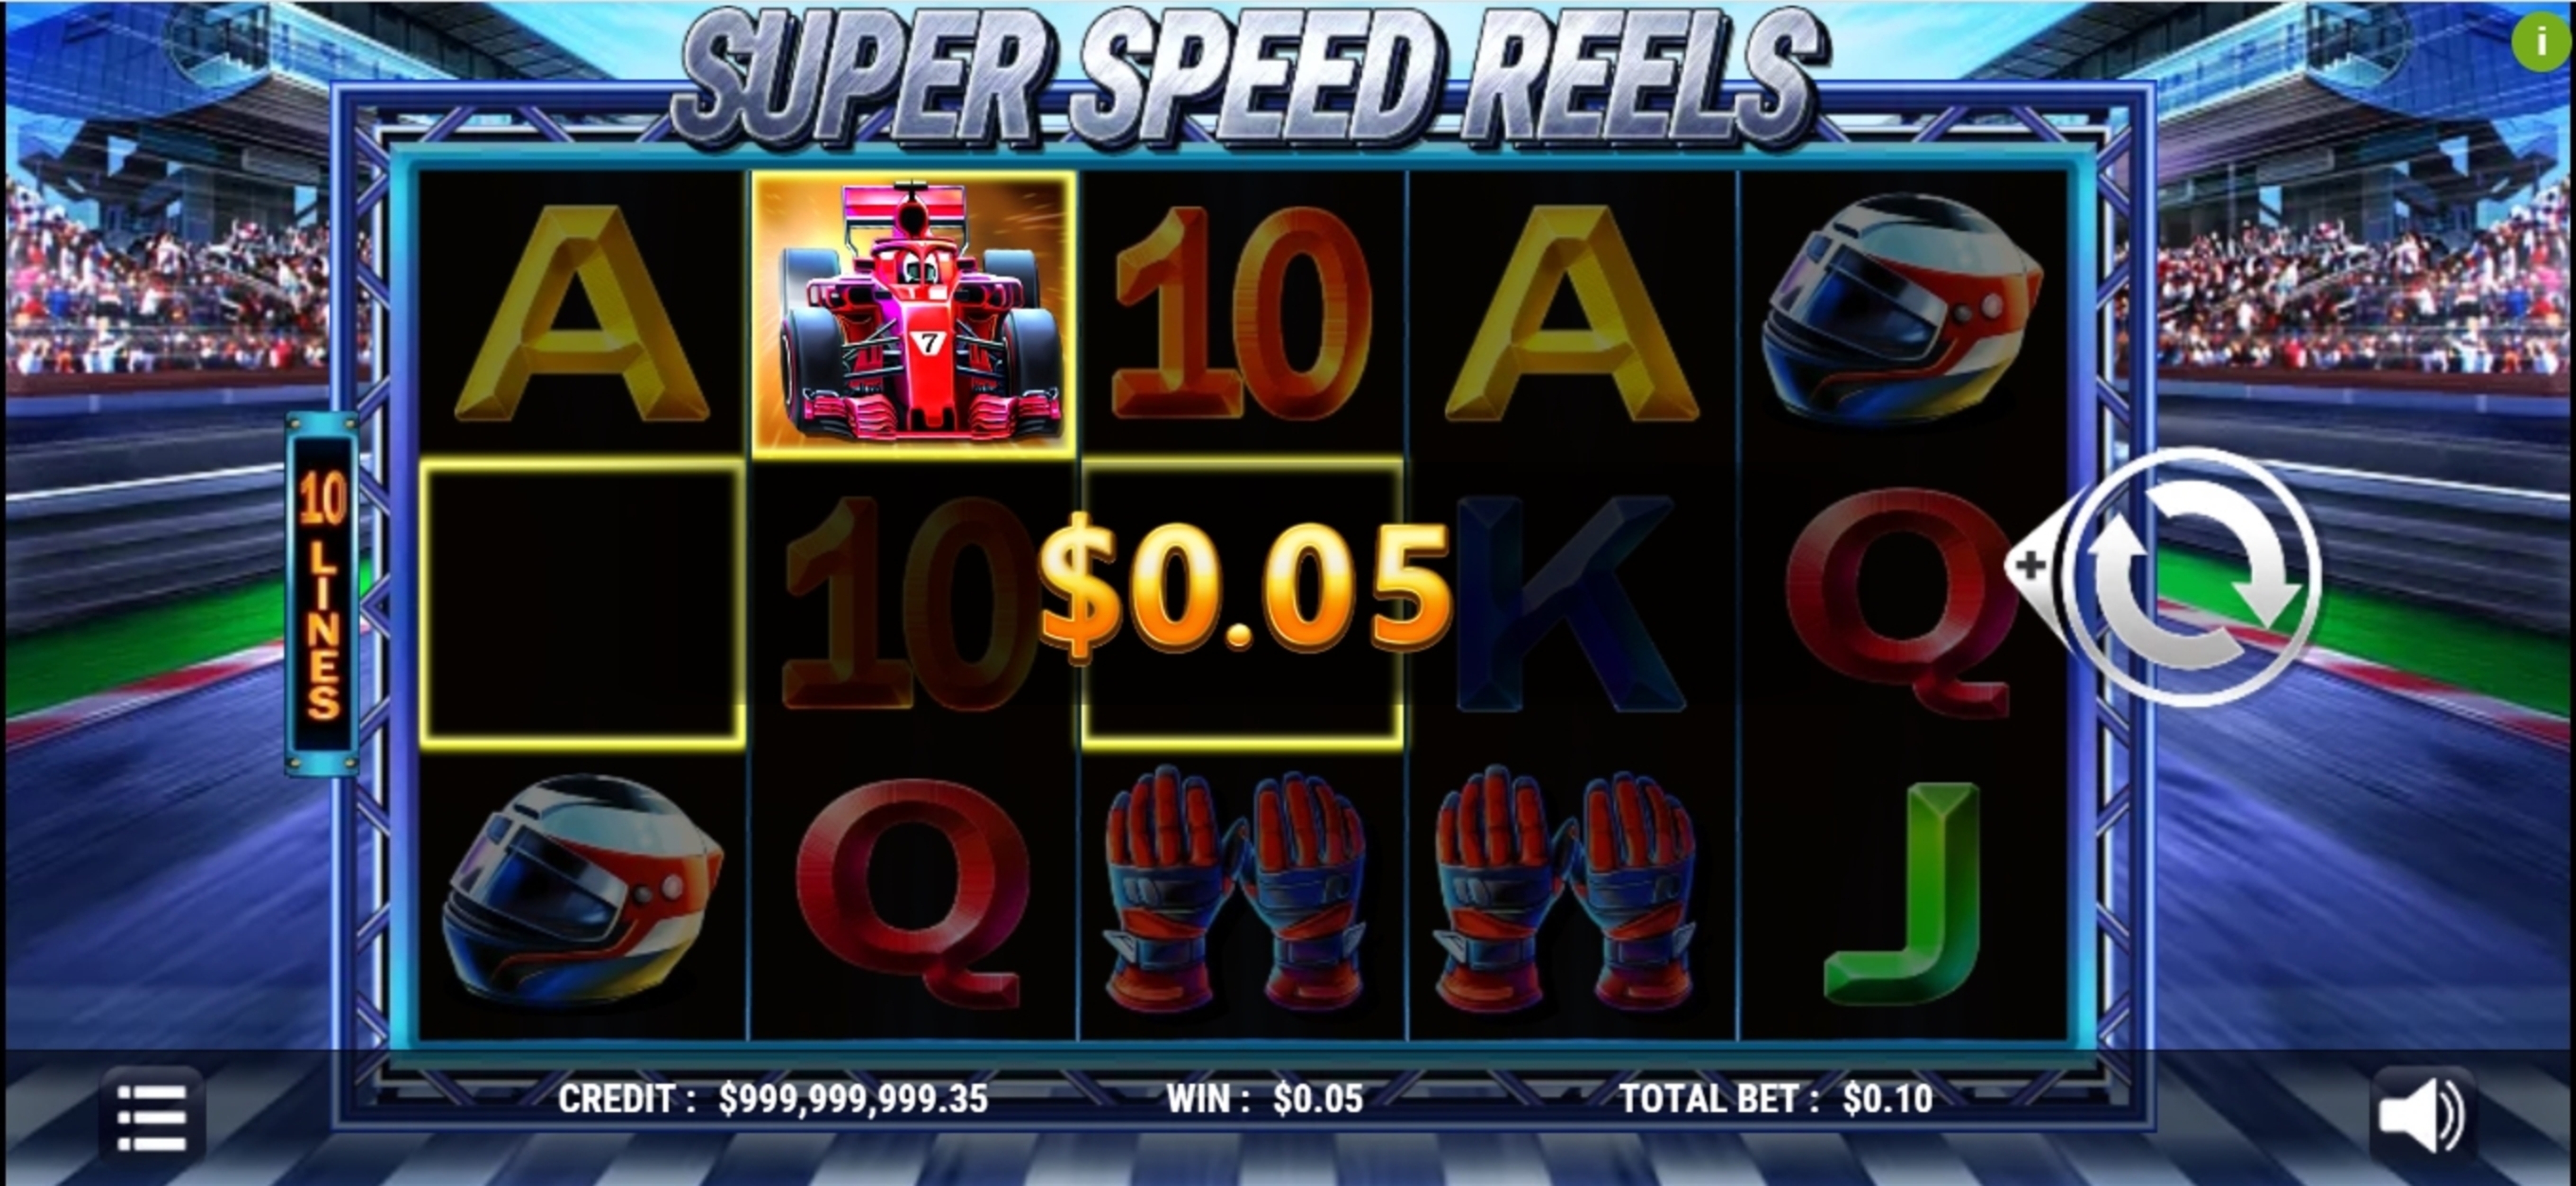 Win Money in Super Speed Reels Free Slot Game by Slot Factory